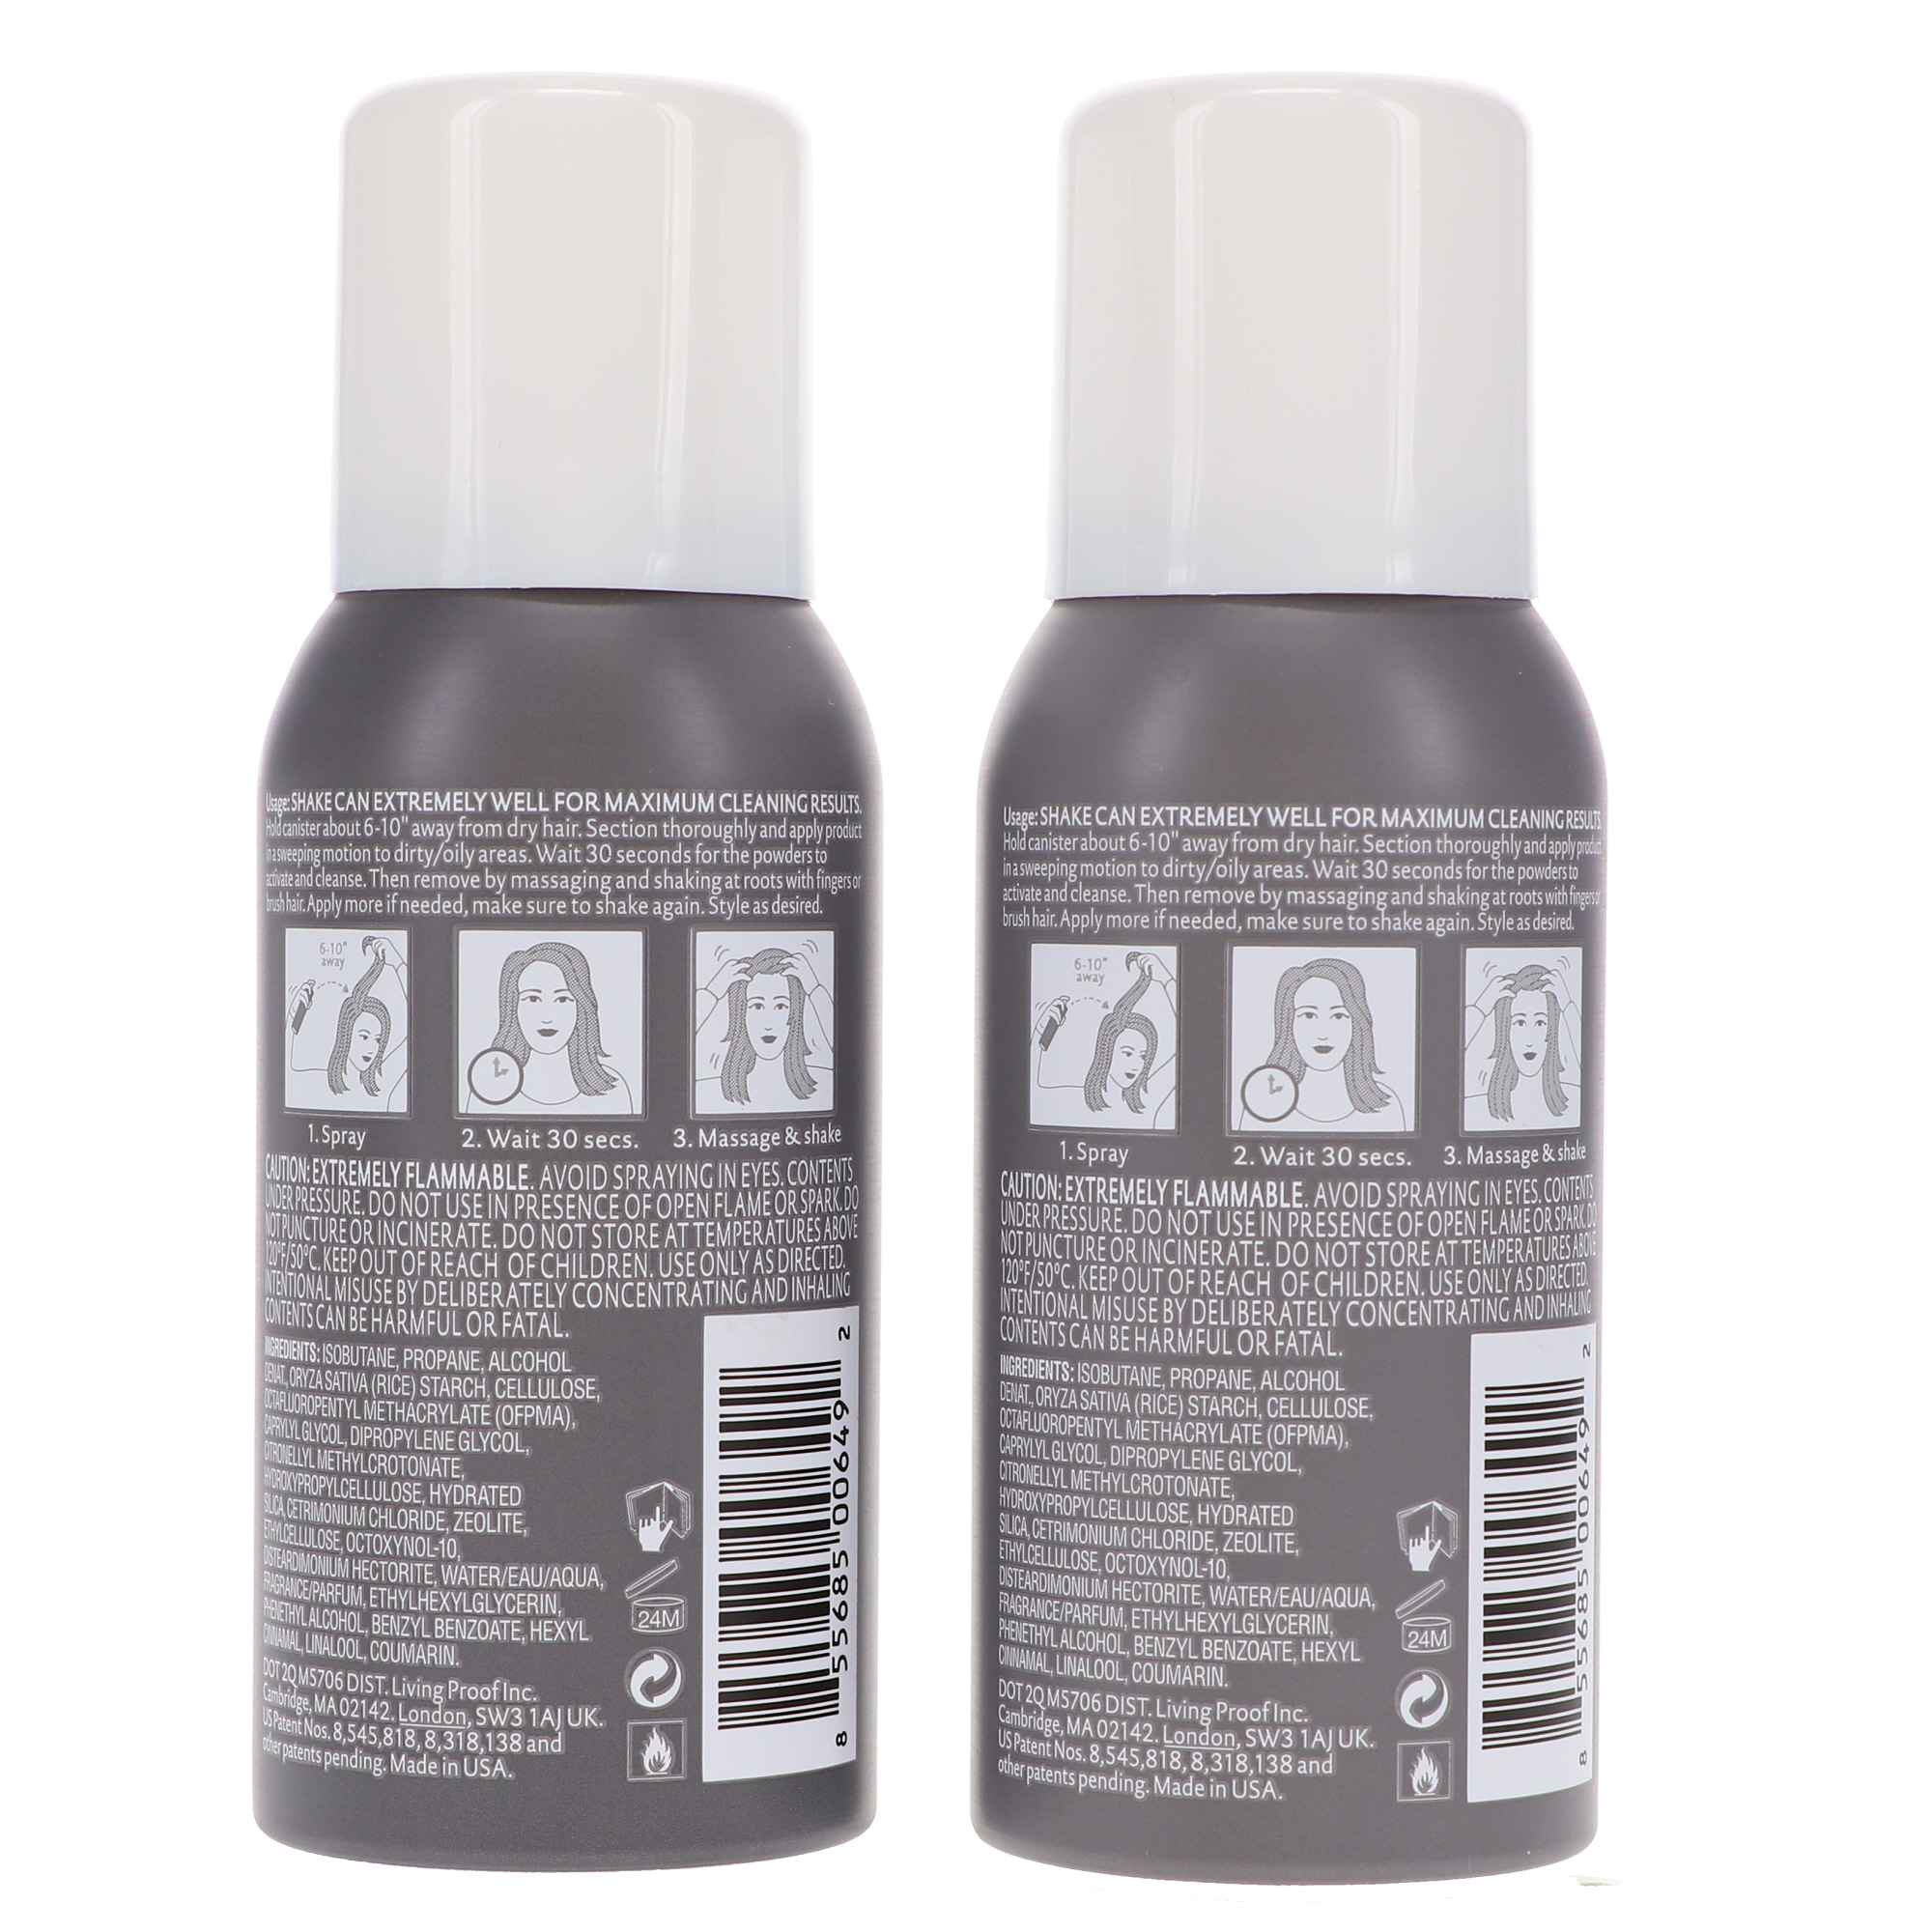 Living Proof Perfect Hair Day Dry Shampoo 1.8 oz. Two Pack